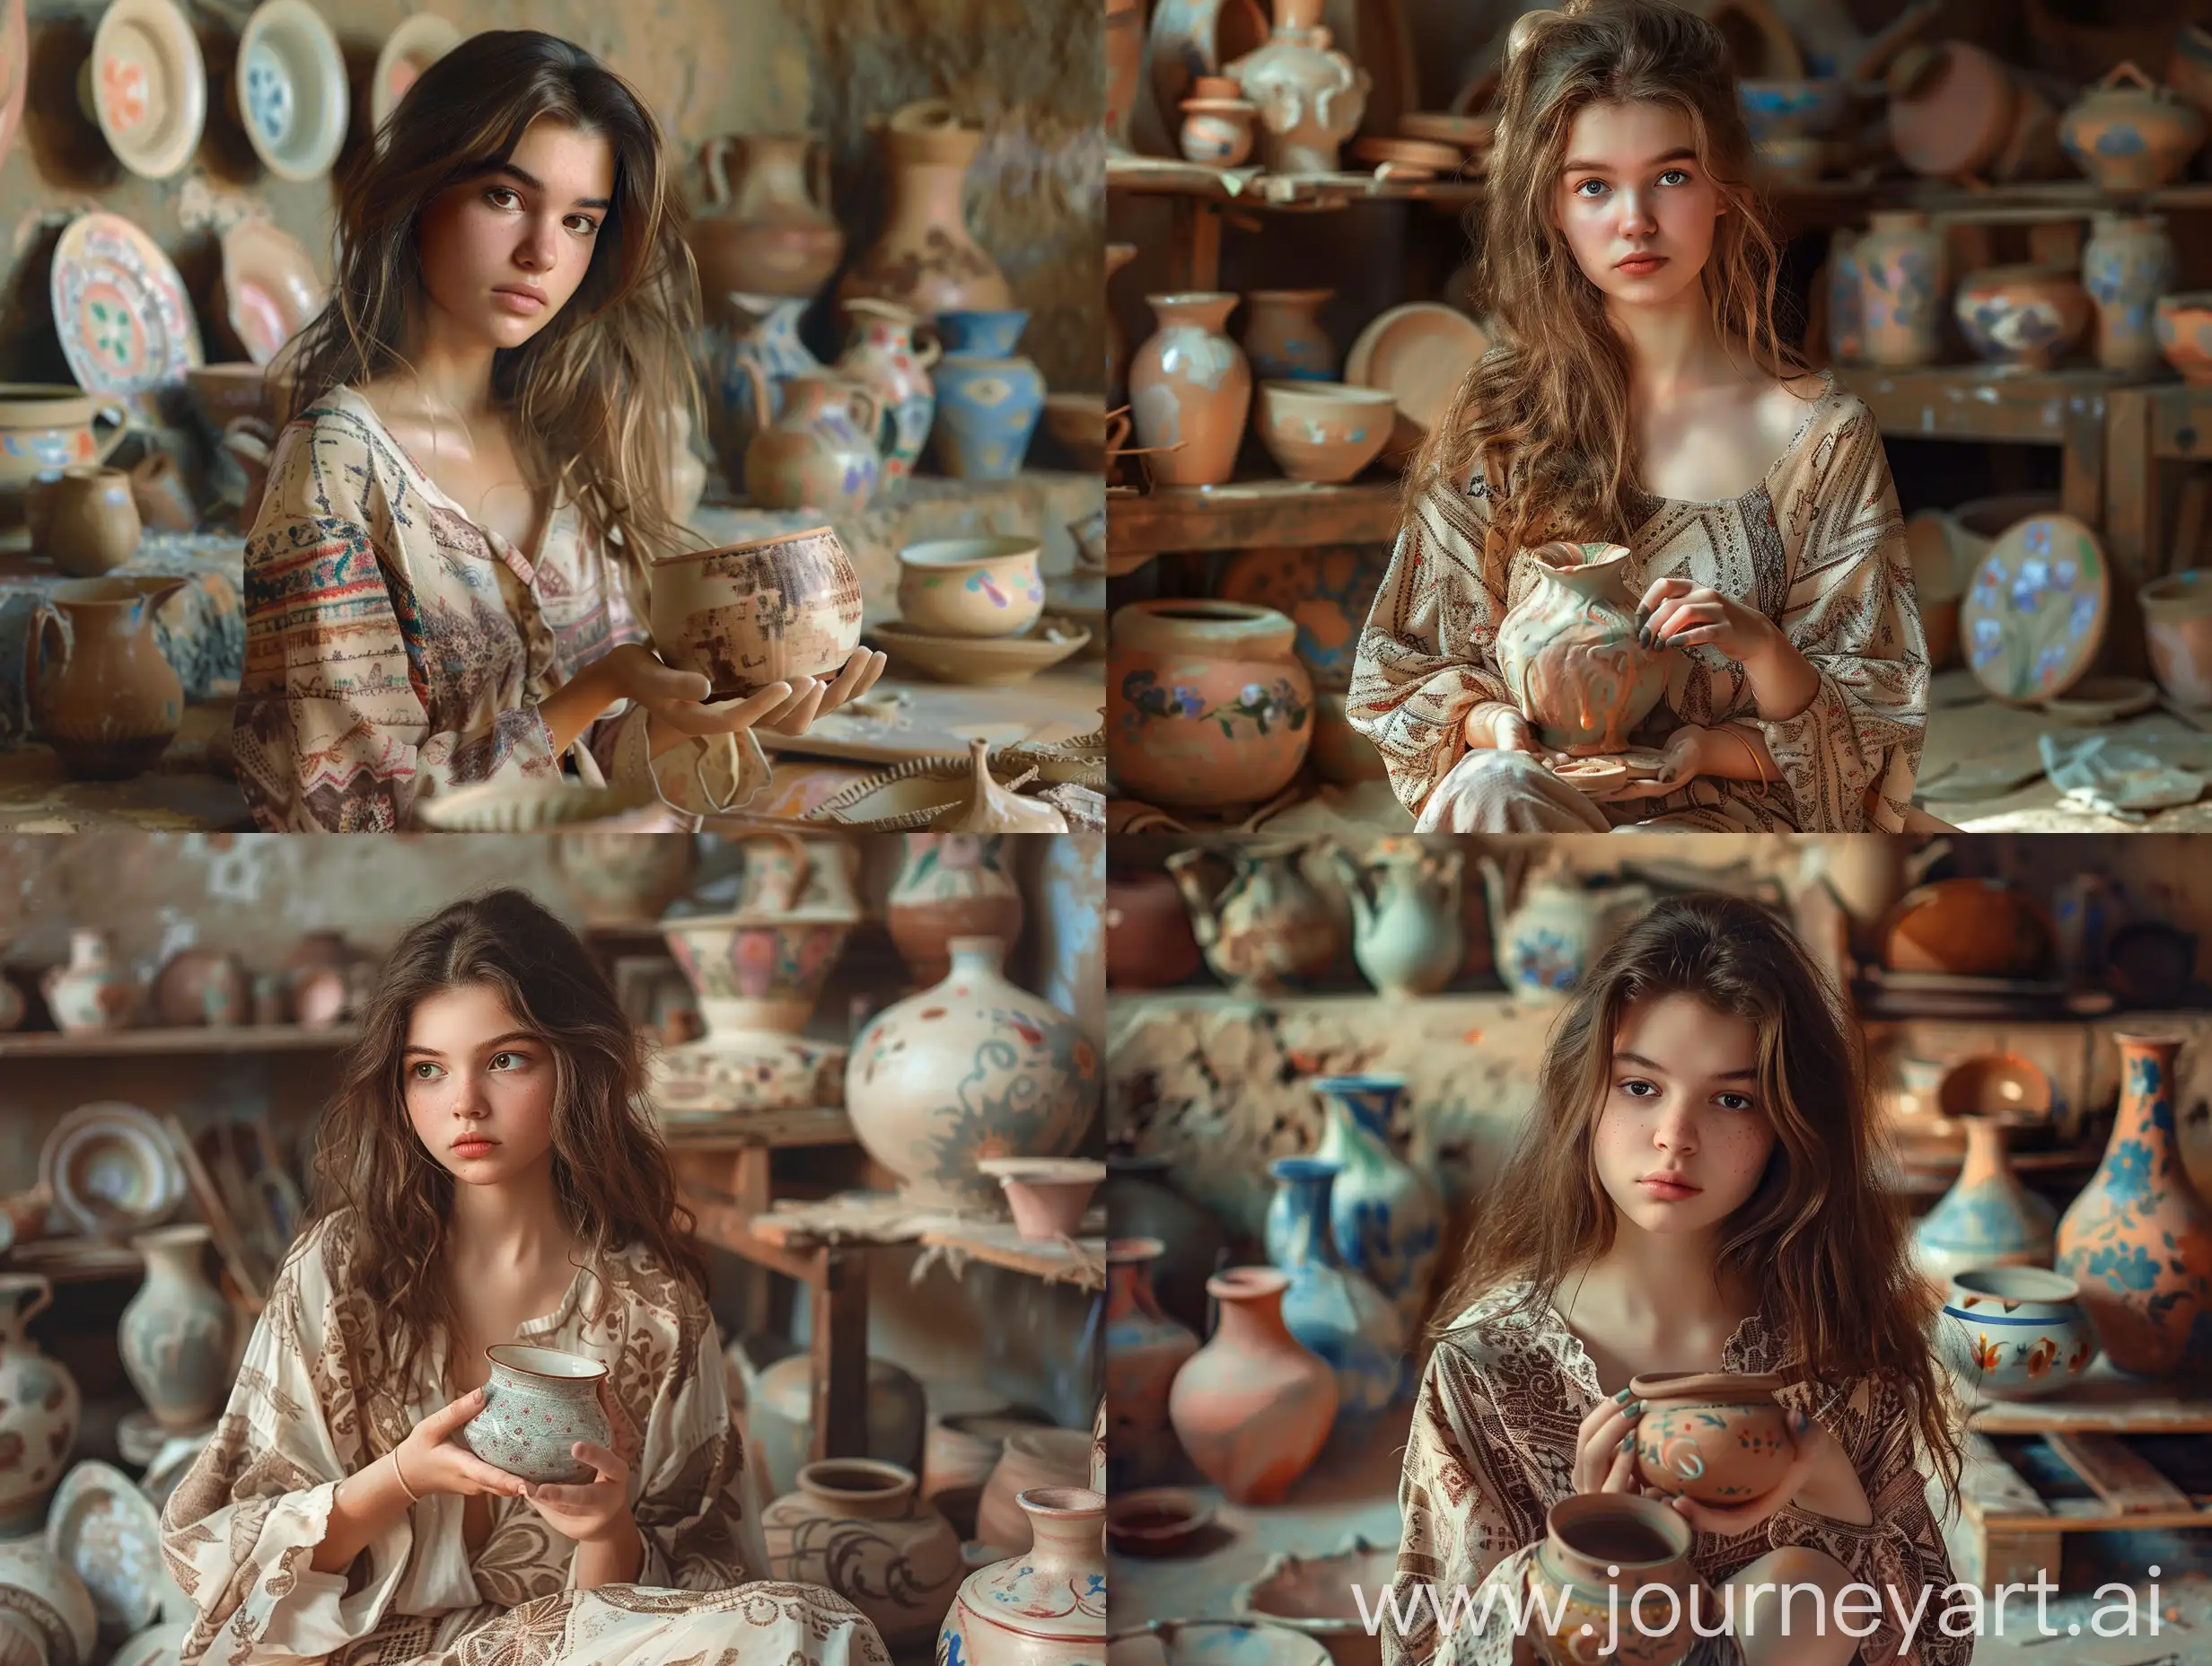 Young-Woman-in-Clay-Workshop-with-Handmade-Ceramics